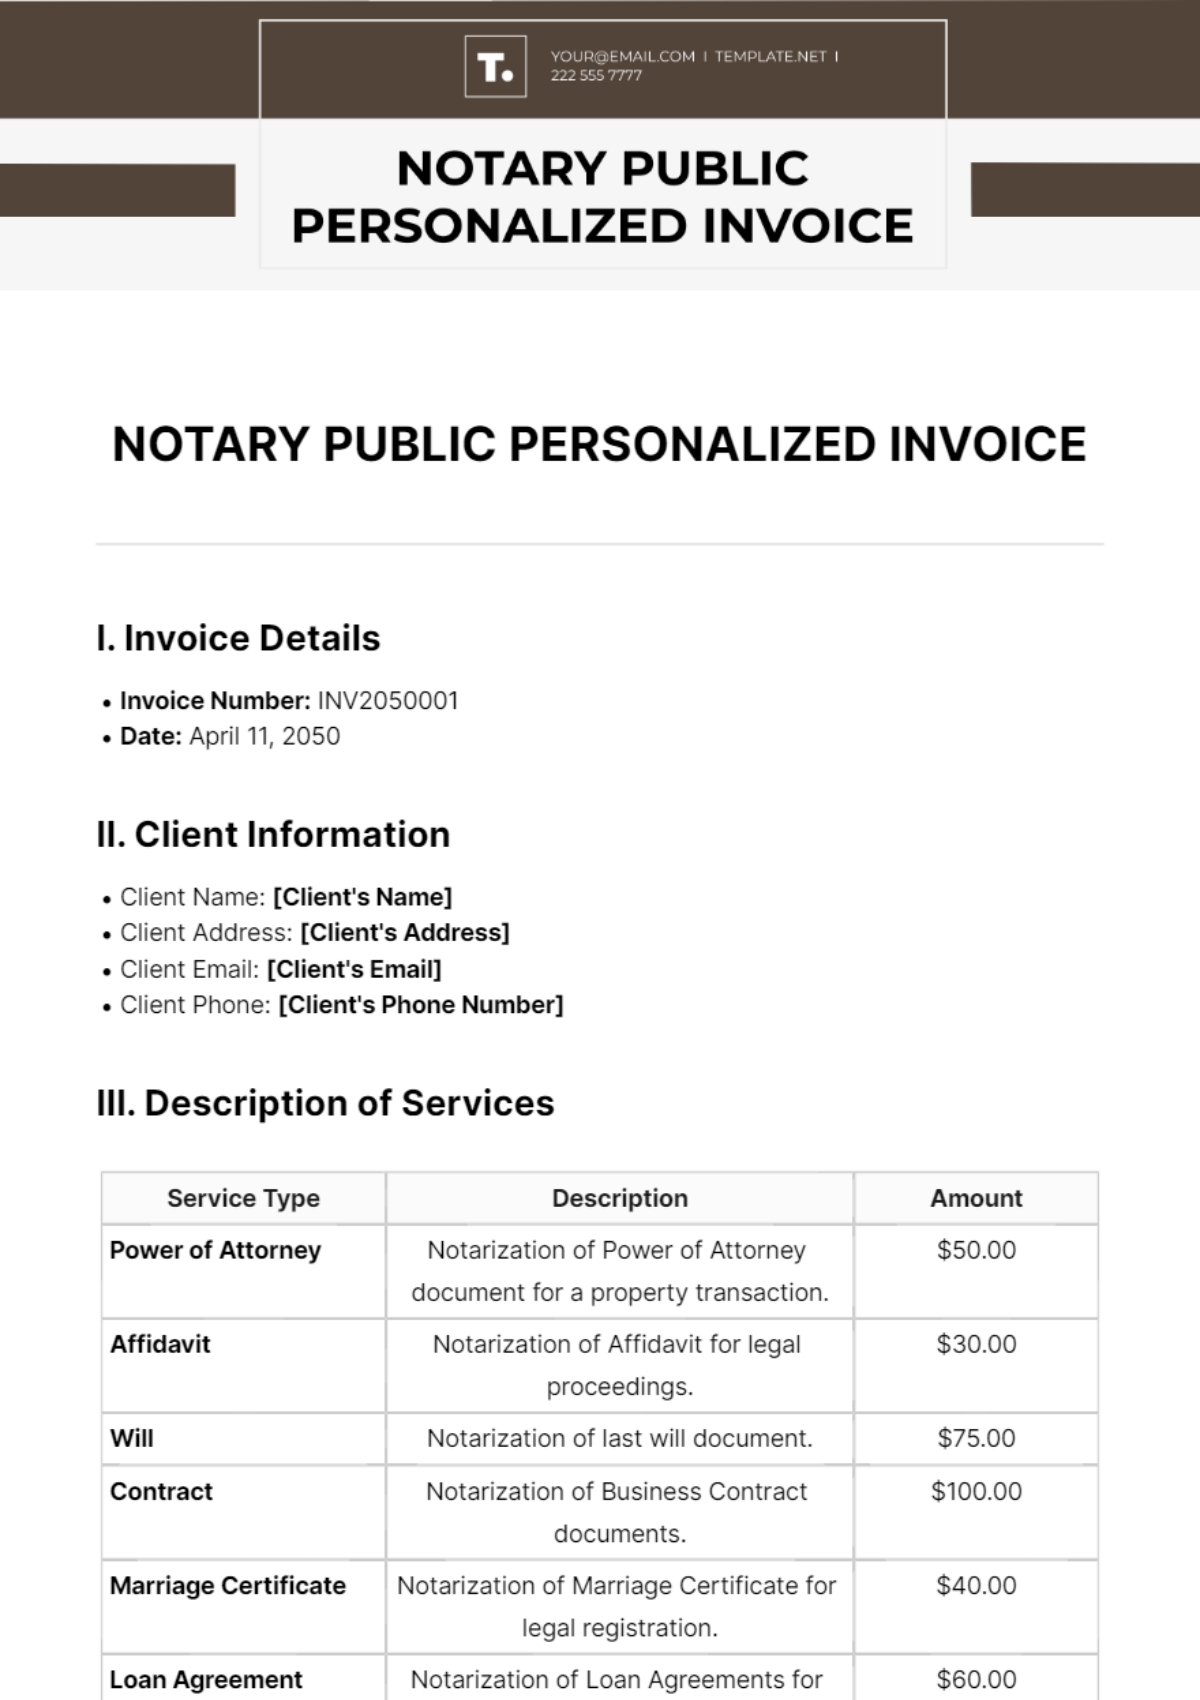 Notary Public Personalized Invoice Template